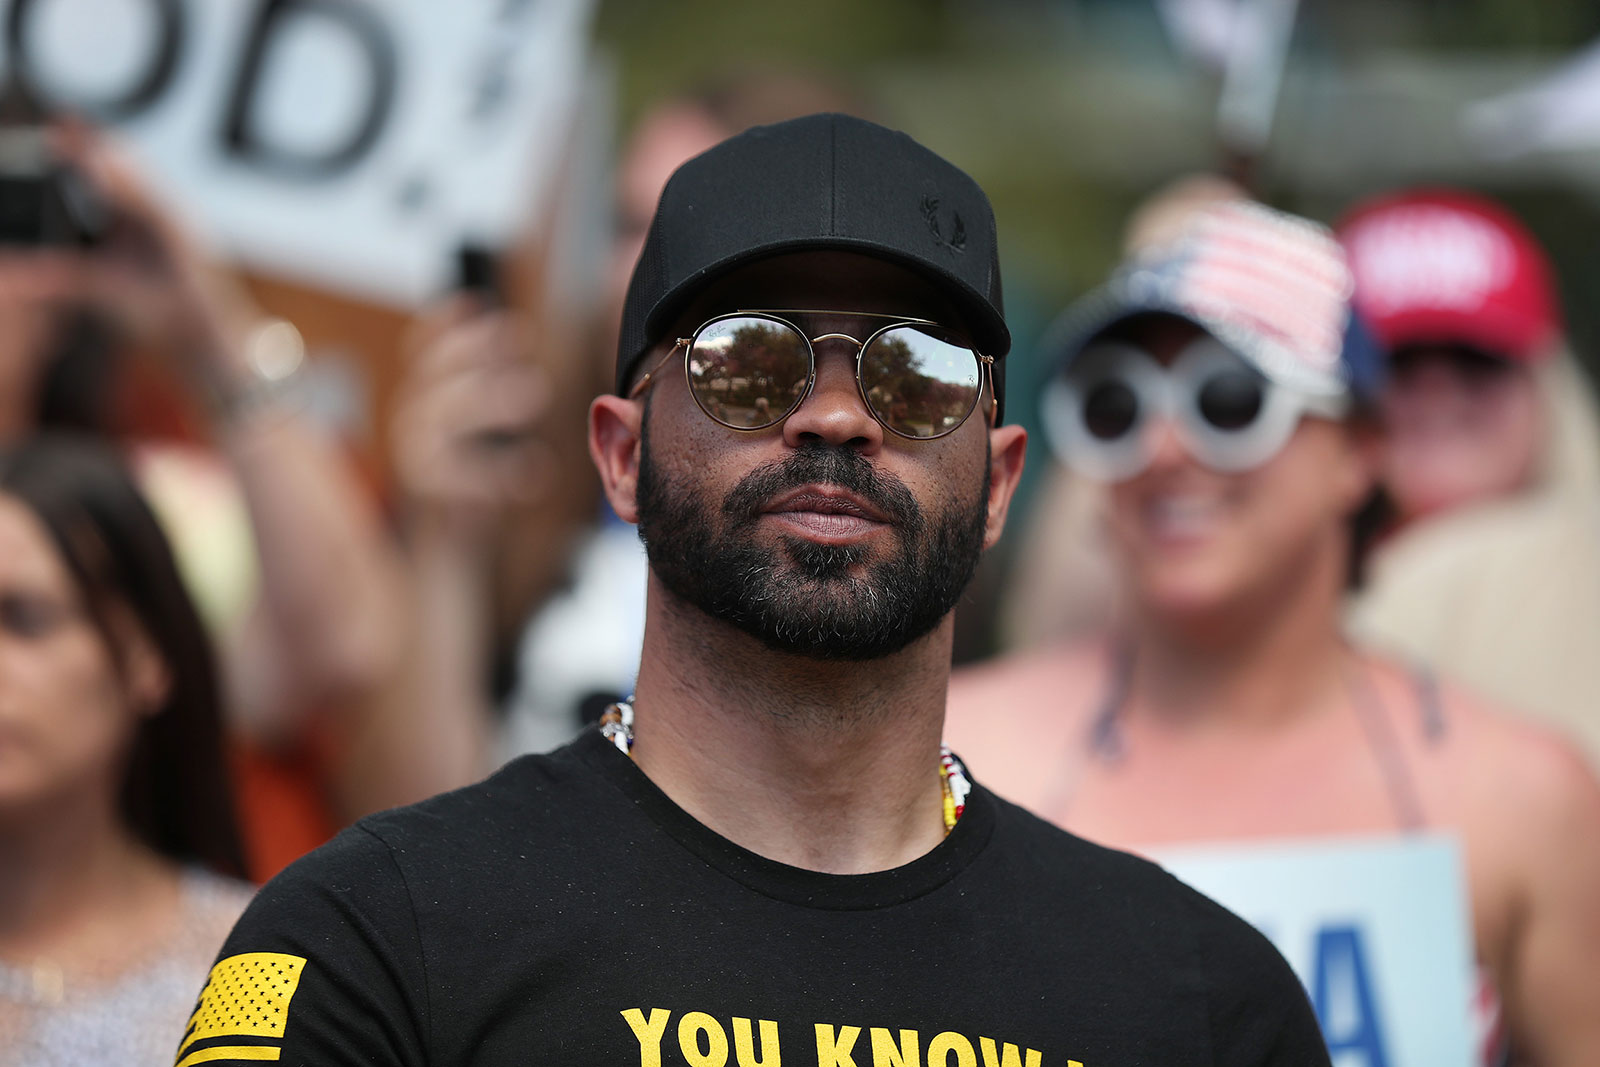 Proud Boys leader Enrique Tarrio pleaded not guilty to the new charge of seditious conspiracy.